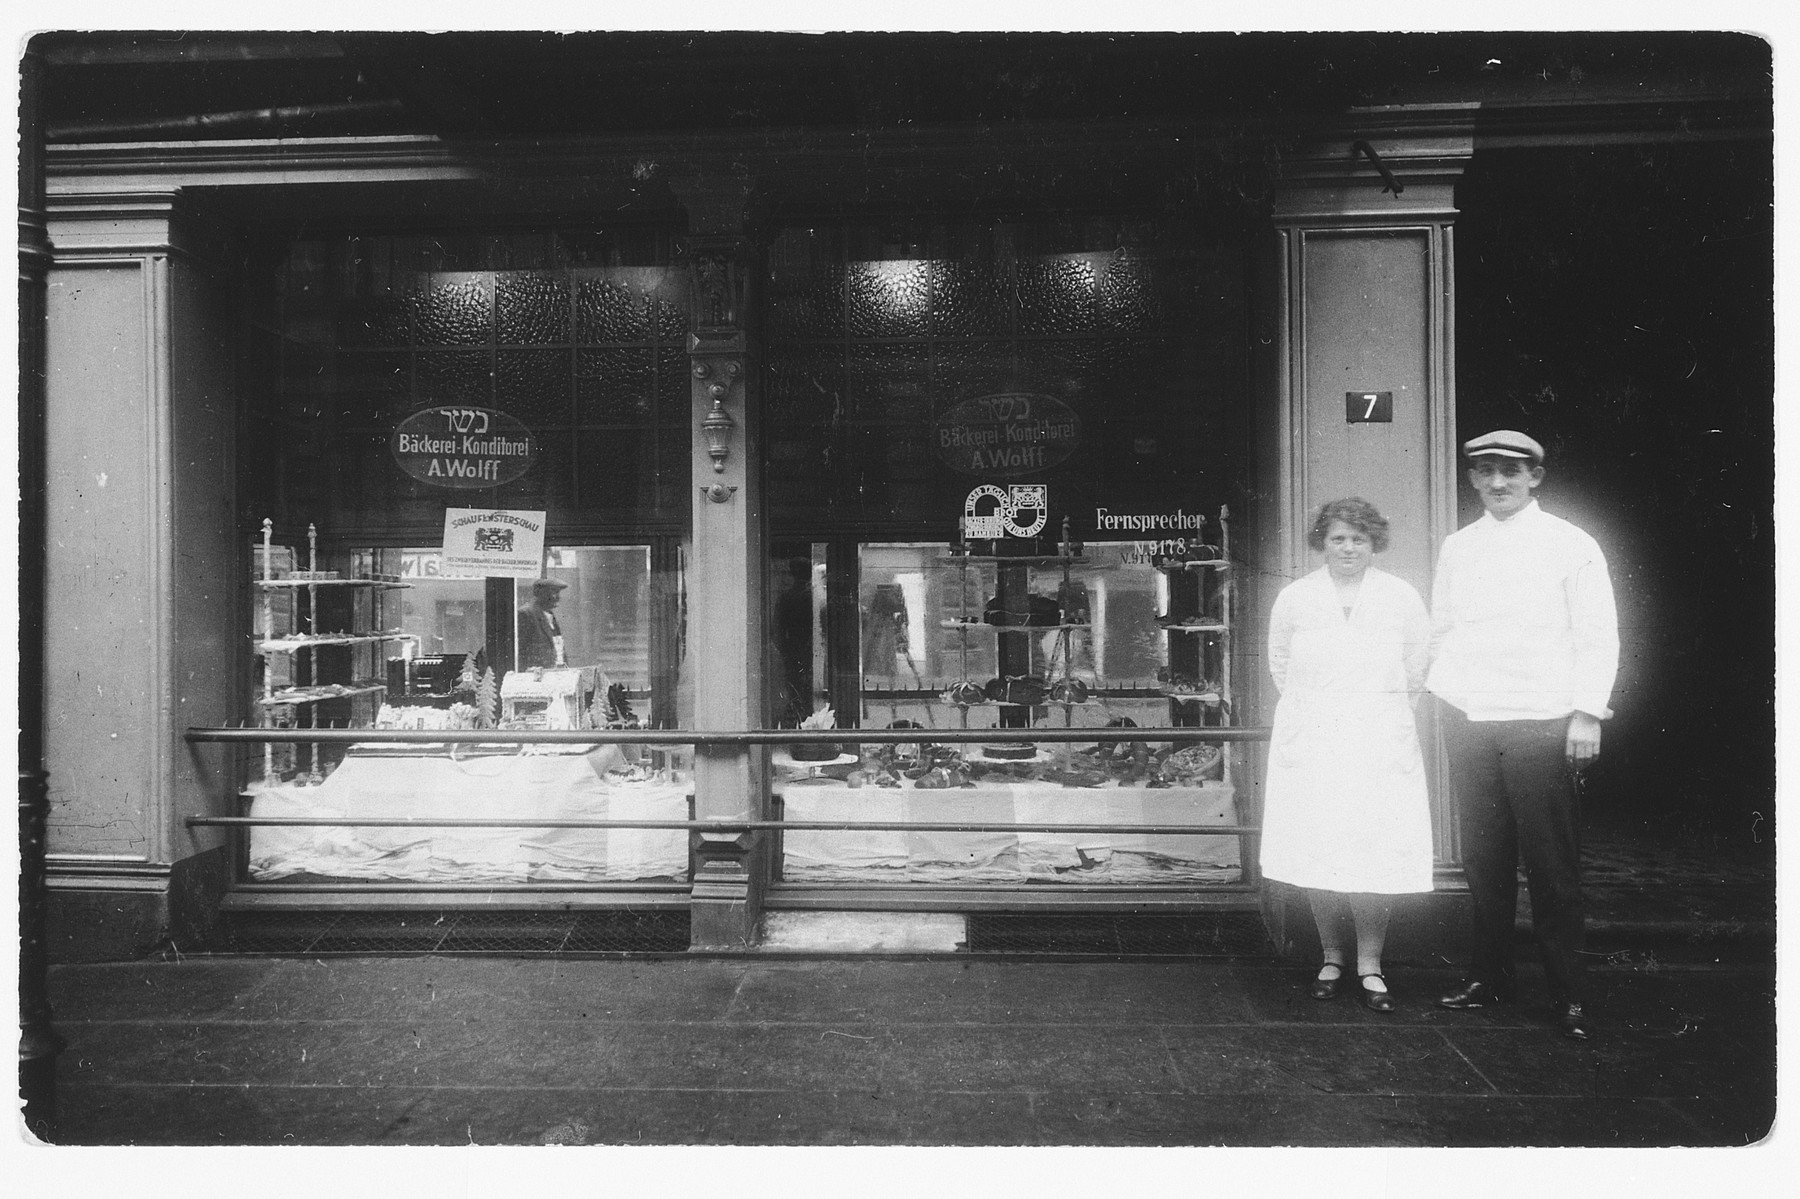 Proprietors of a kosher bakery stand in front of their store window.

Pictured are Angela Stiefel and her brother-in-law Adolf Wolf.